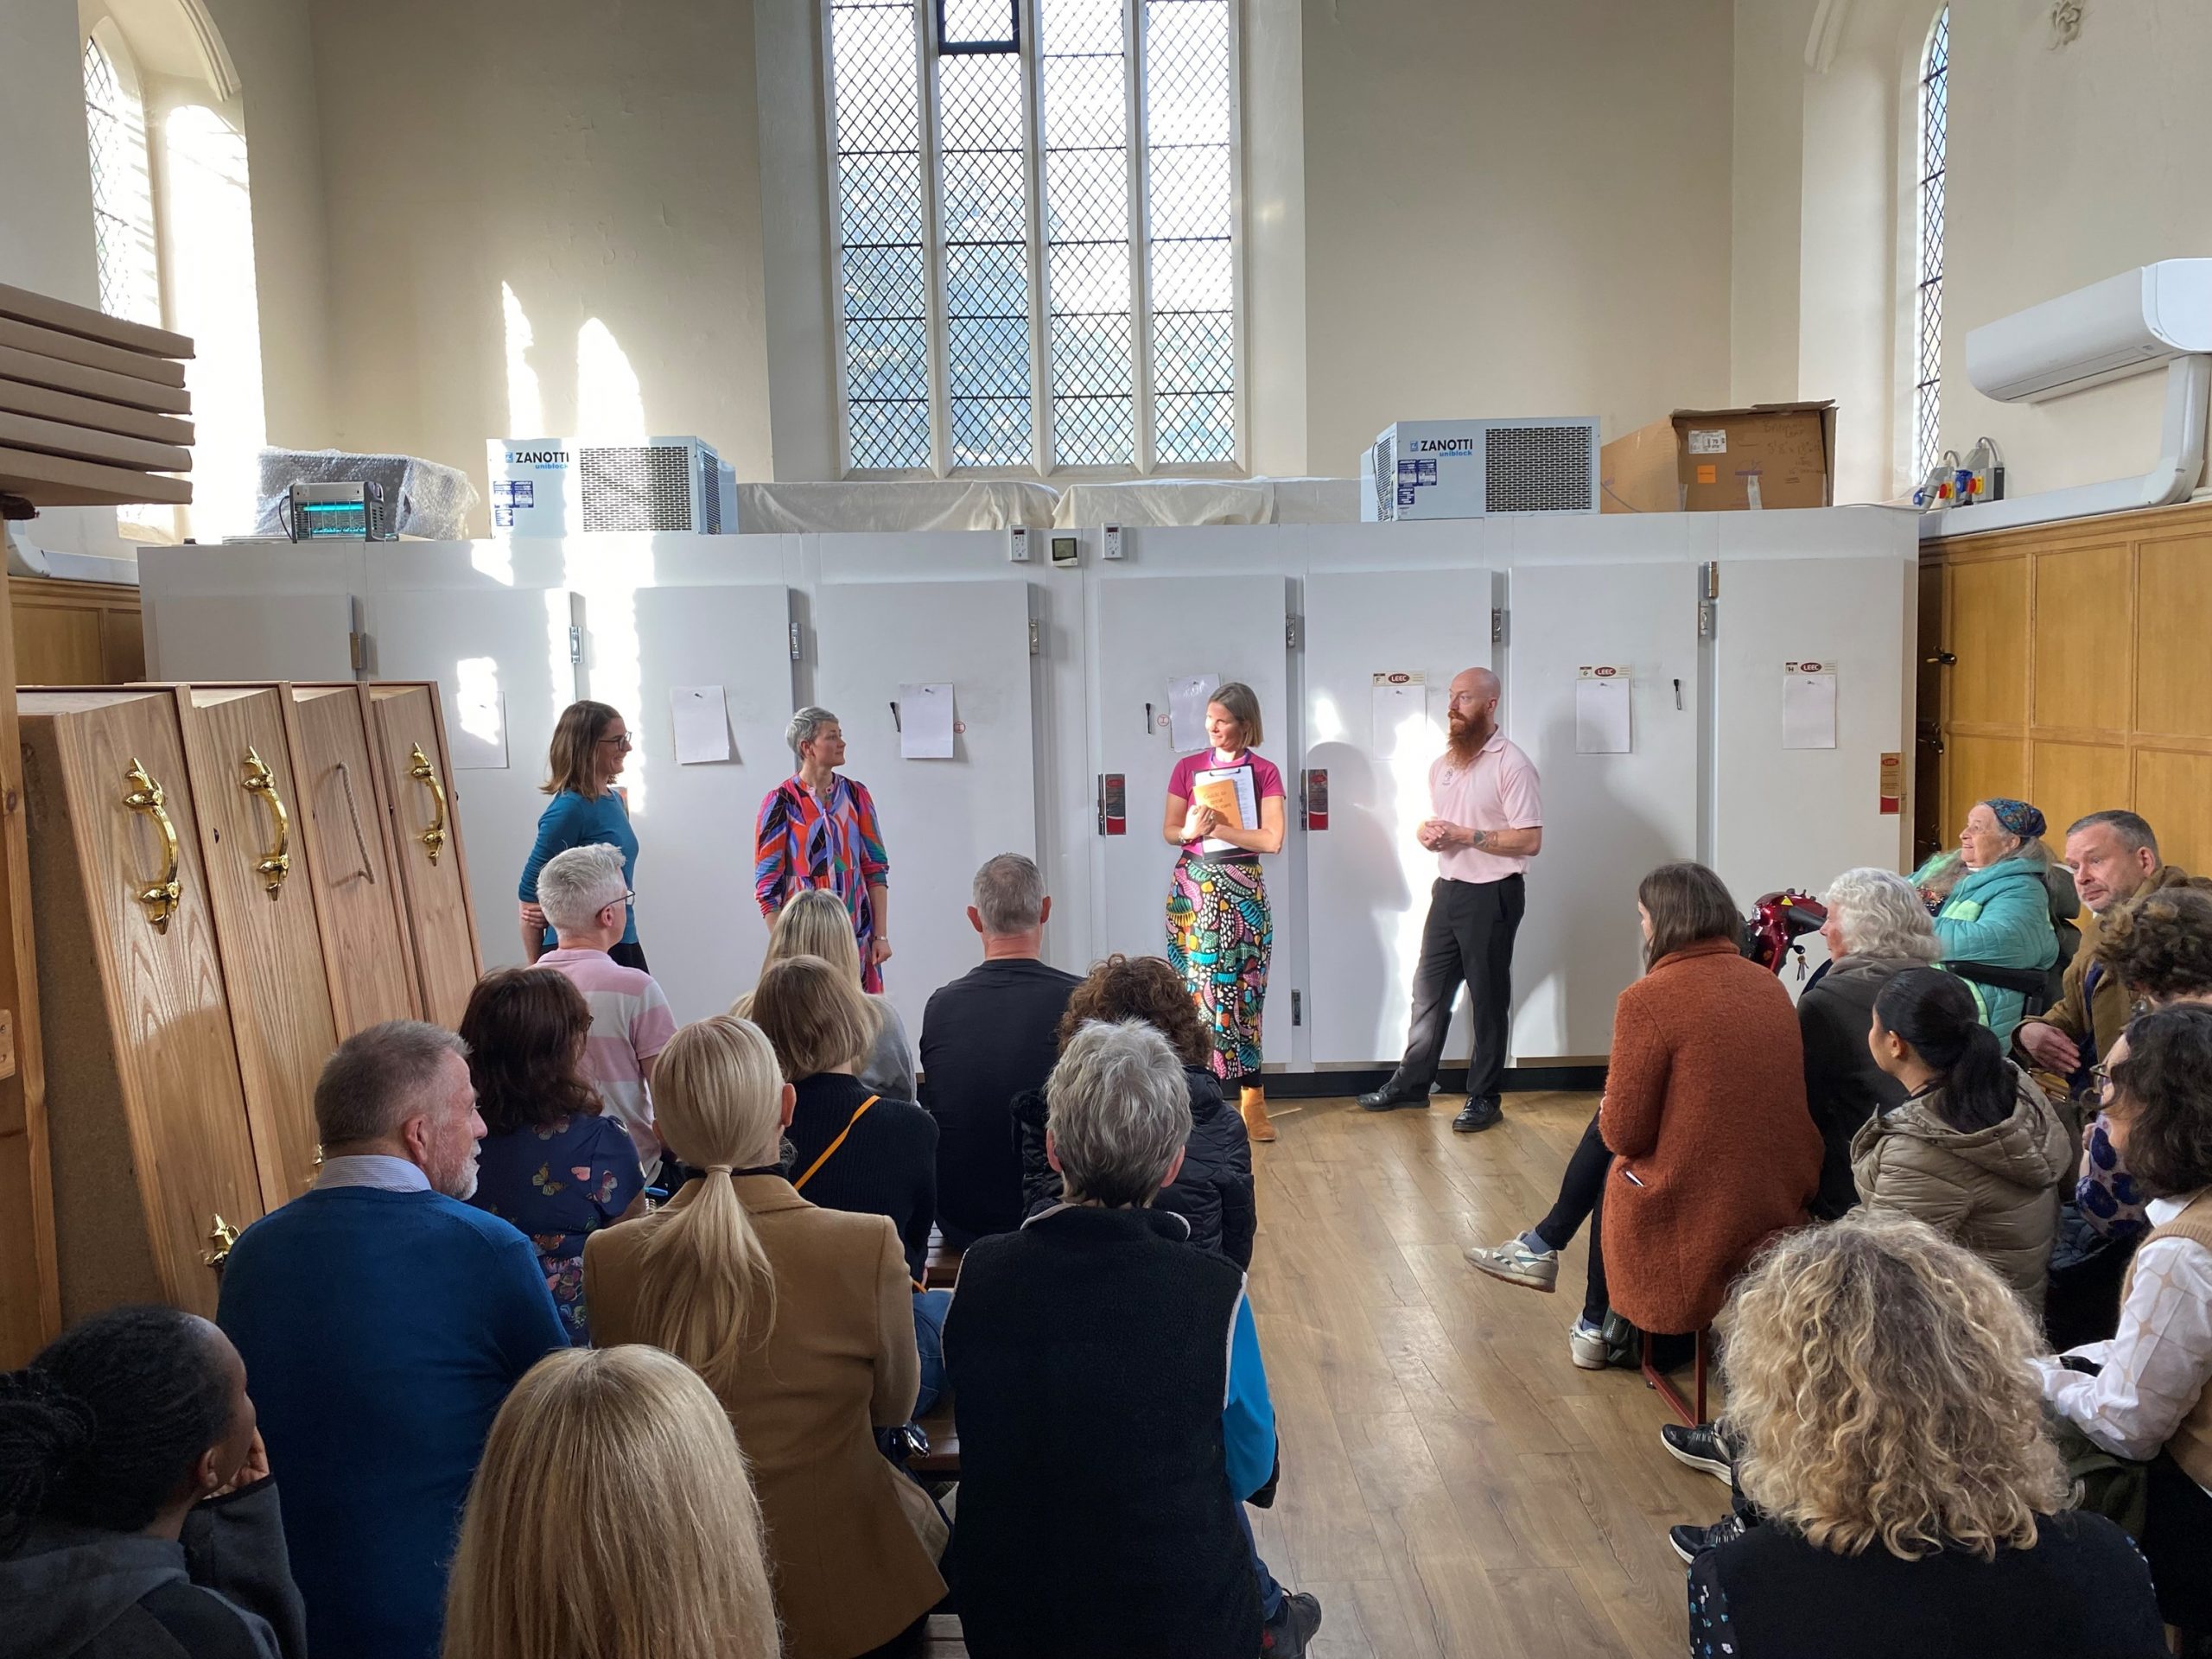 People gathered in a church with coffins to one side. Four people are stood presenting at the front whilst others are gathered on seats, listening